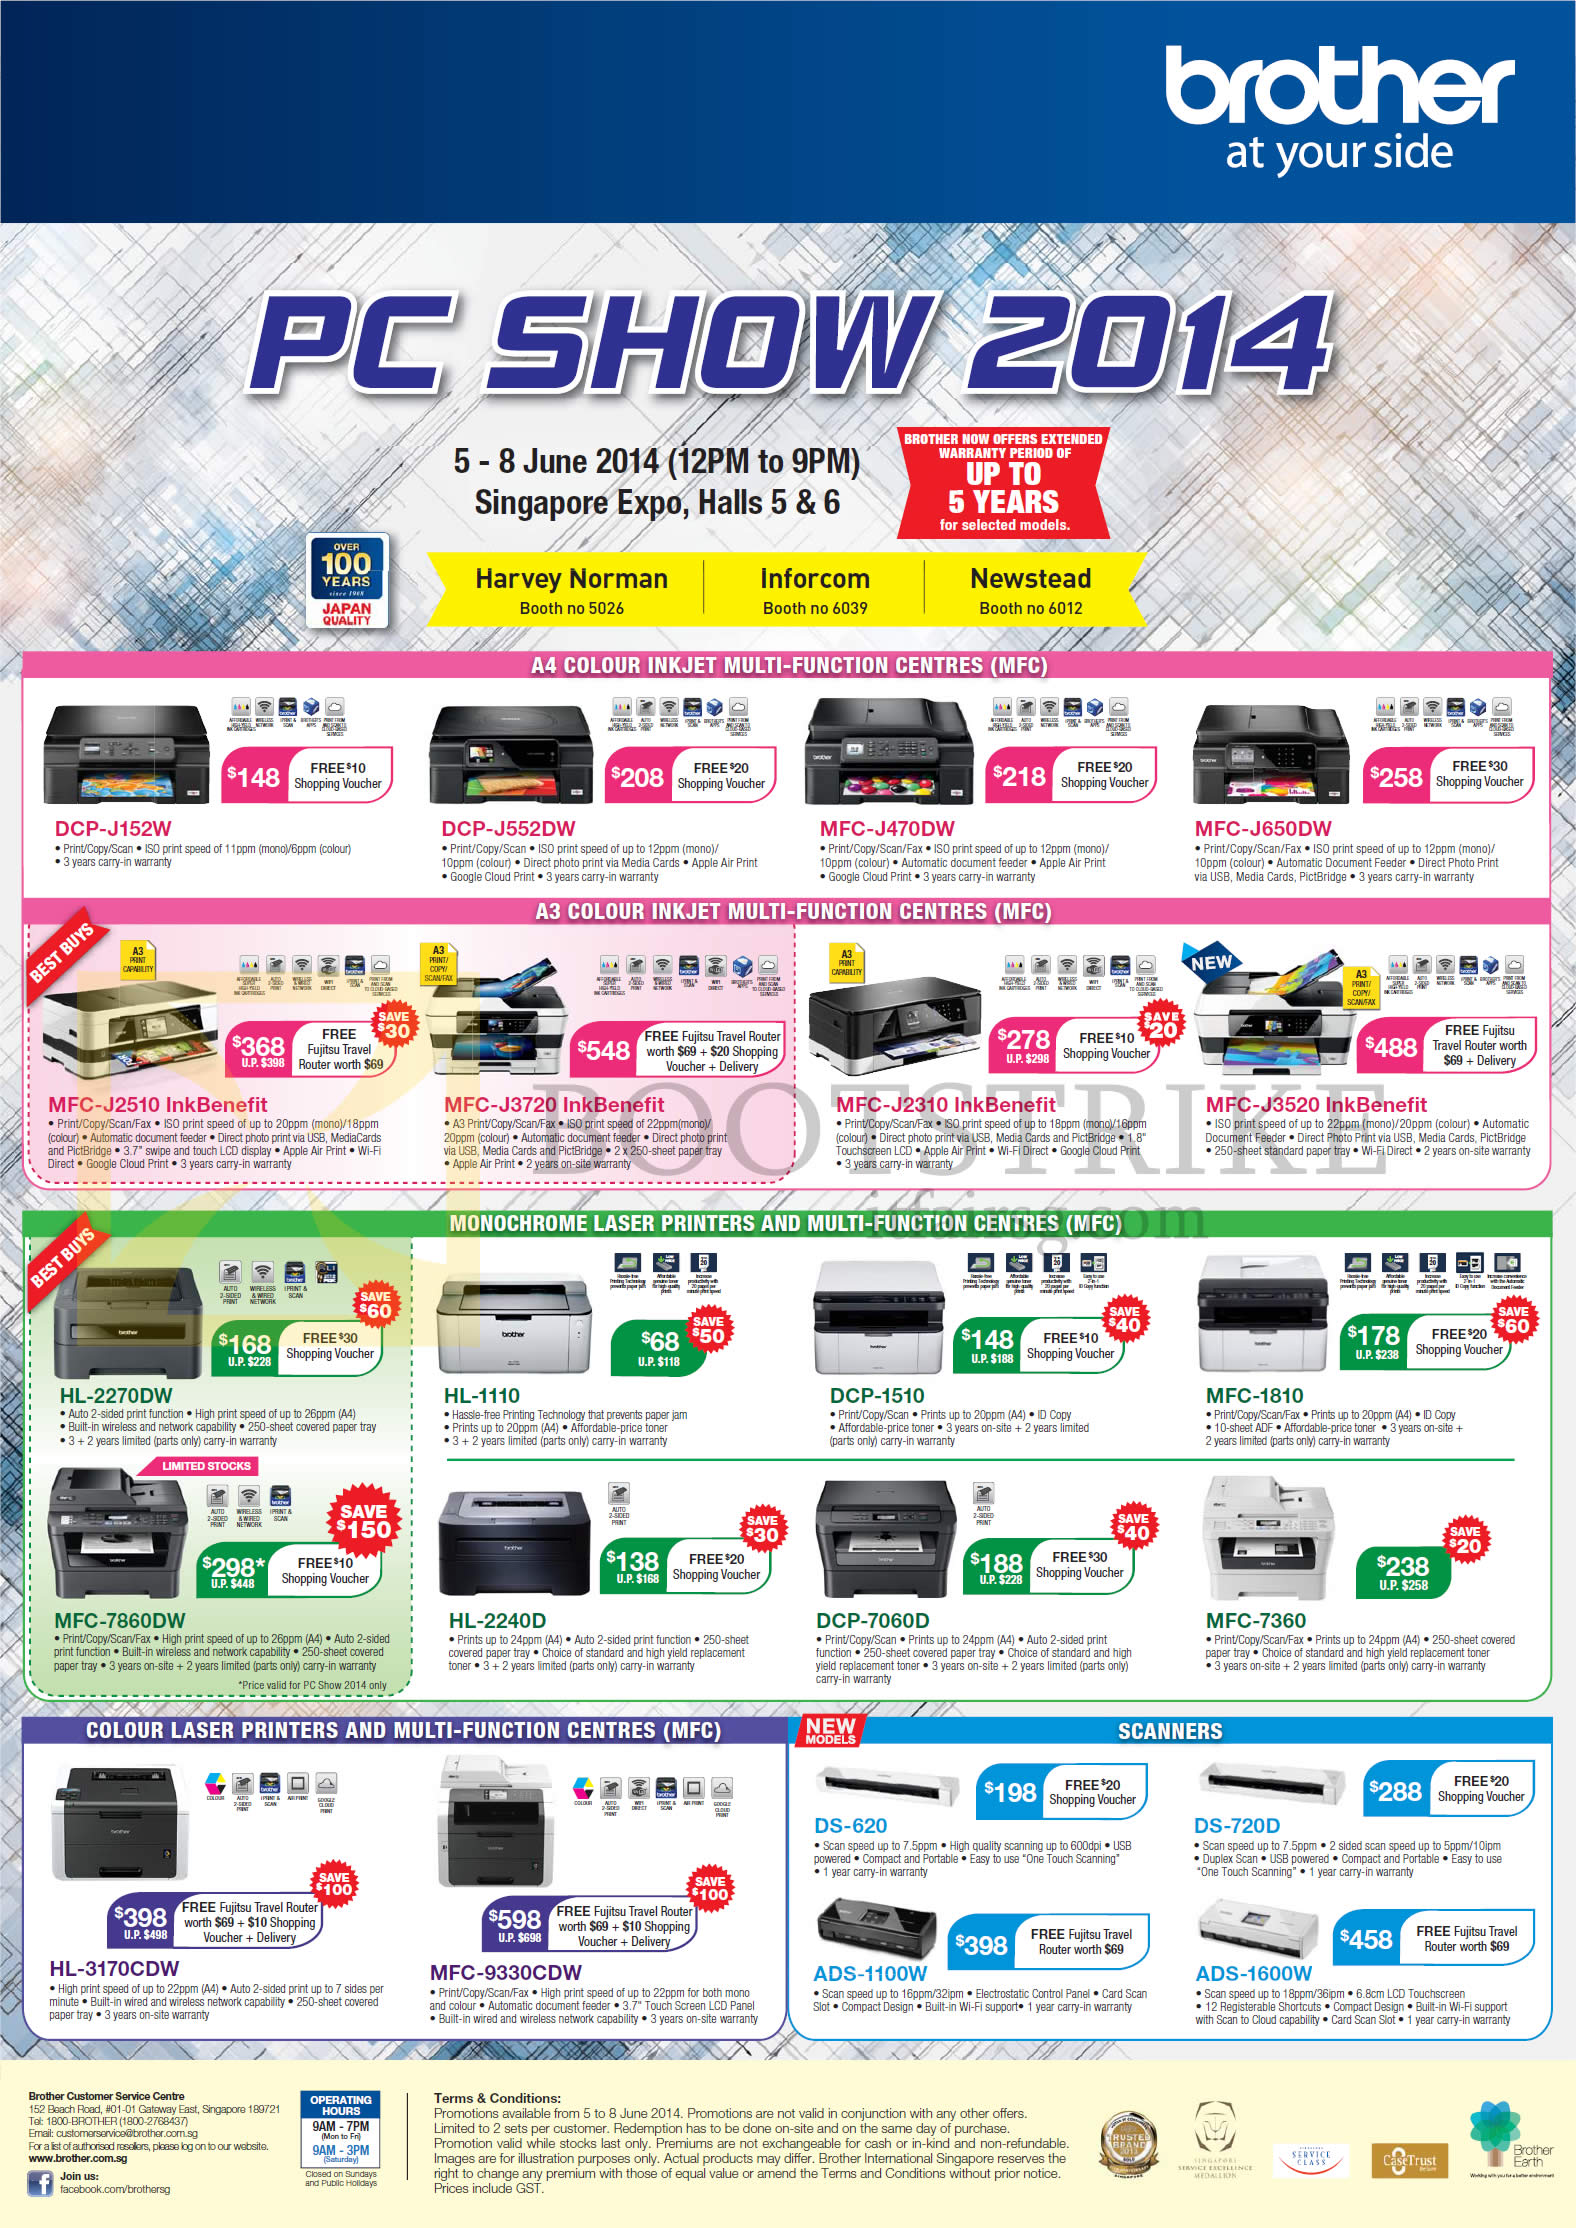 PC SHOW 2014 price list image brochure of Brother Printers, Scanners DCP-J152W, J552DW, 1510, 7060D, MFC-J470DW, J650DW, J2510, J3720, J2310, J3520, 1810, 7860DW, DS-620, 720D, ADS-1100W